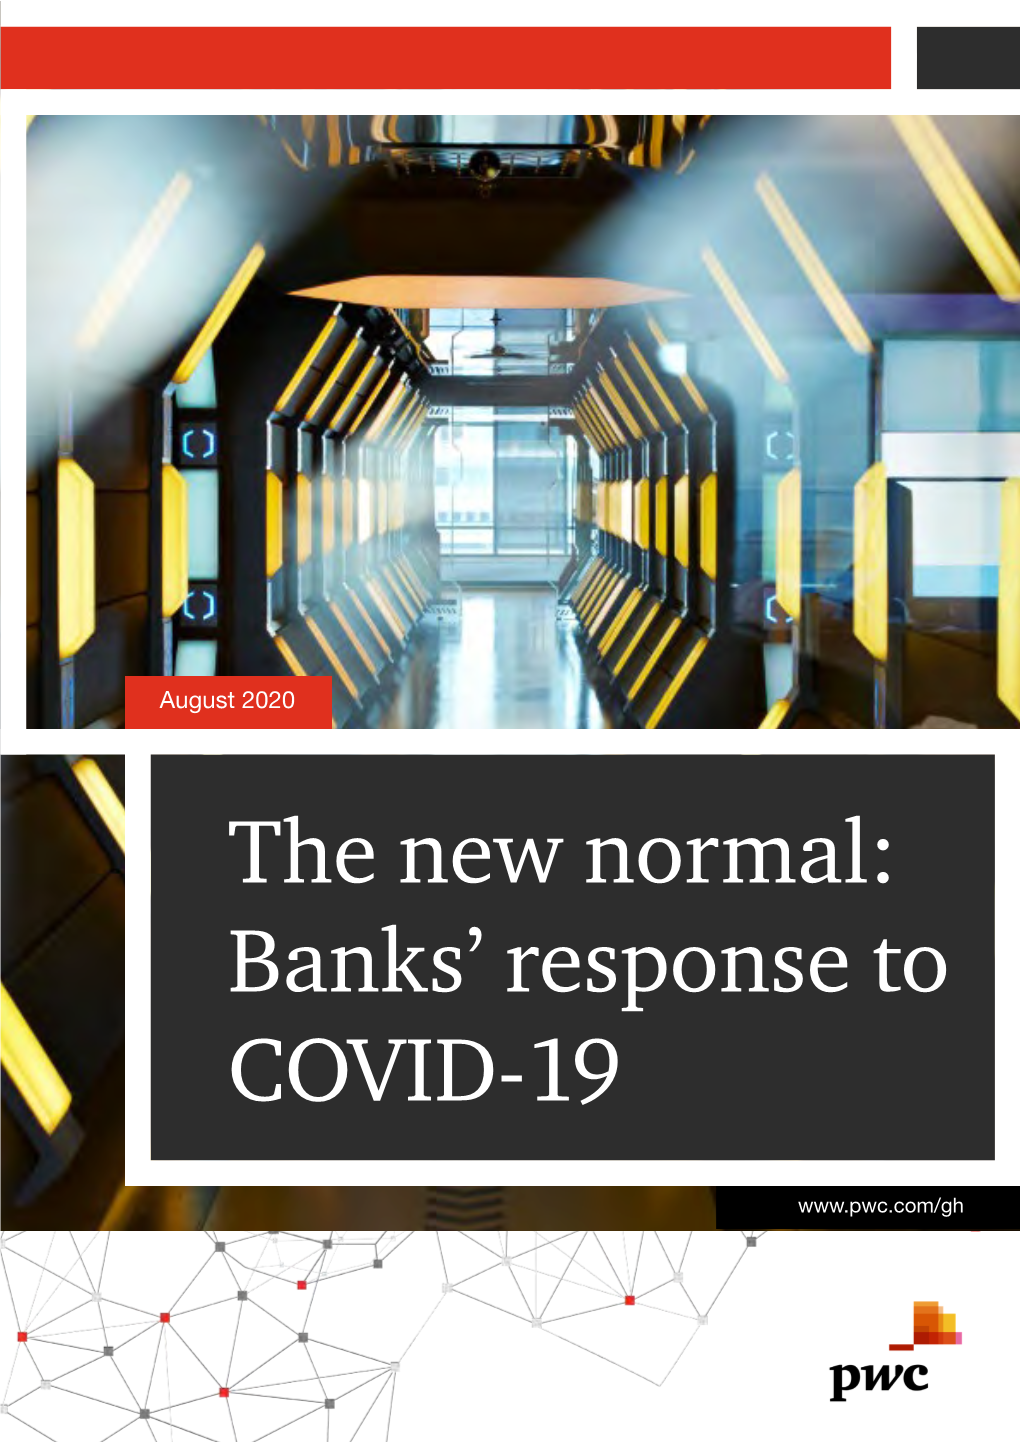 The New Normal: Banks' Response to COVID-19